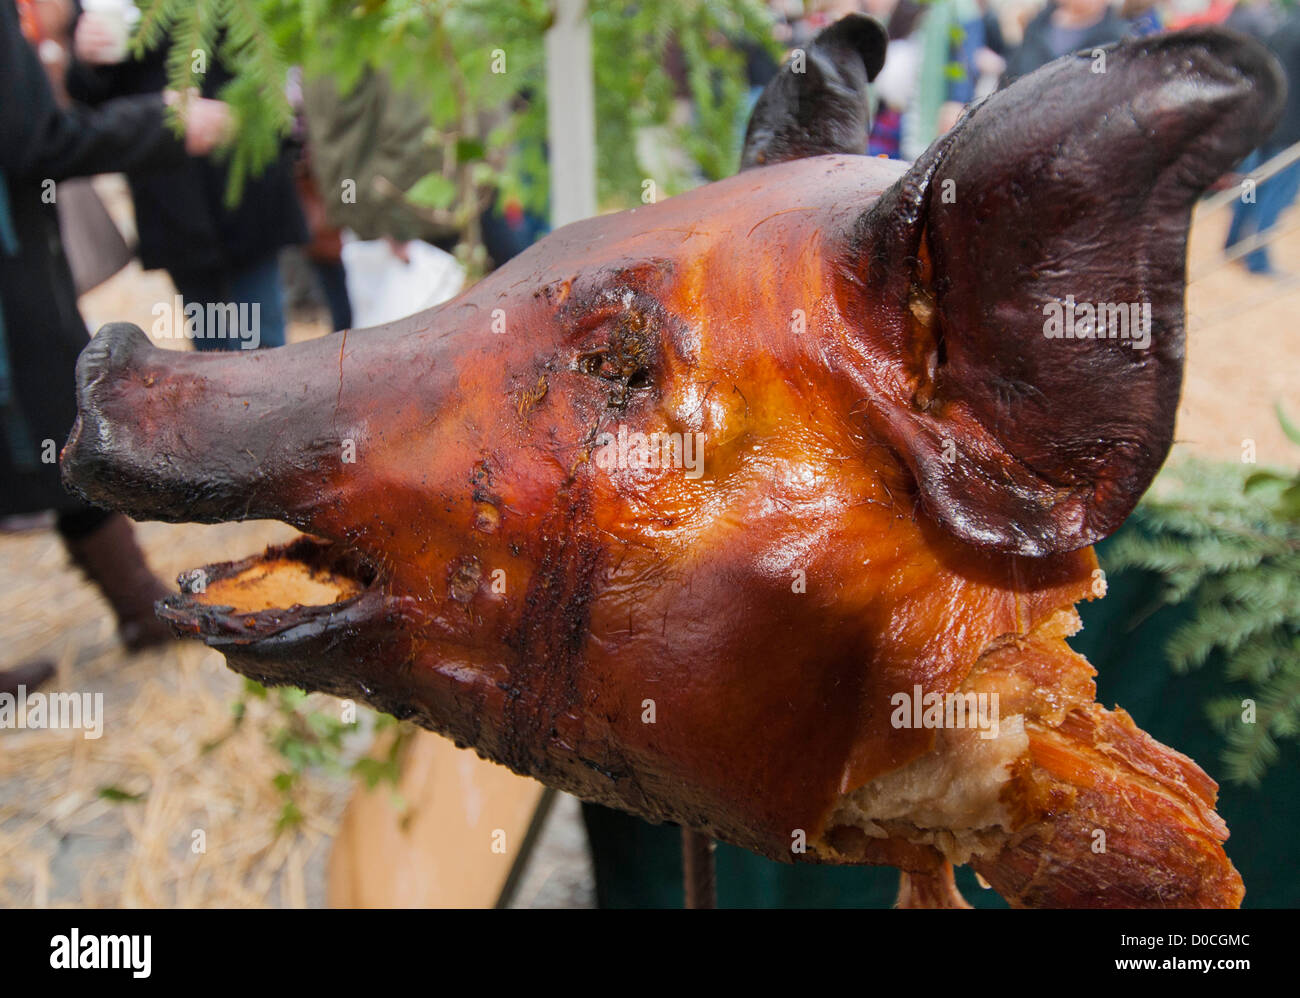 A spit roasted pig's head at the medieval food festival held within the grounds of Ludlow castle Shropshire Stock Photo